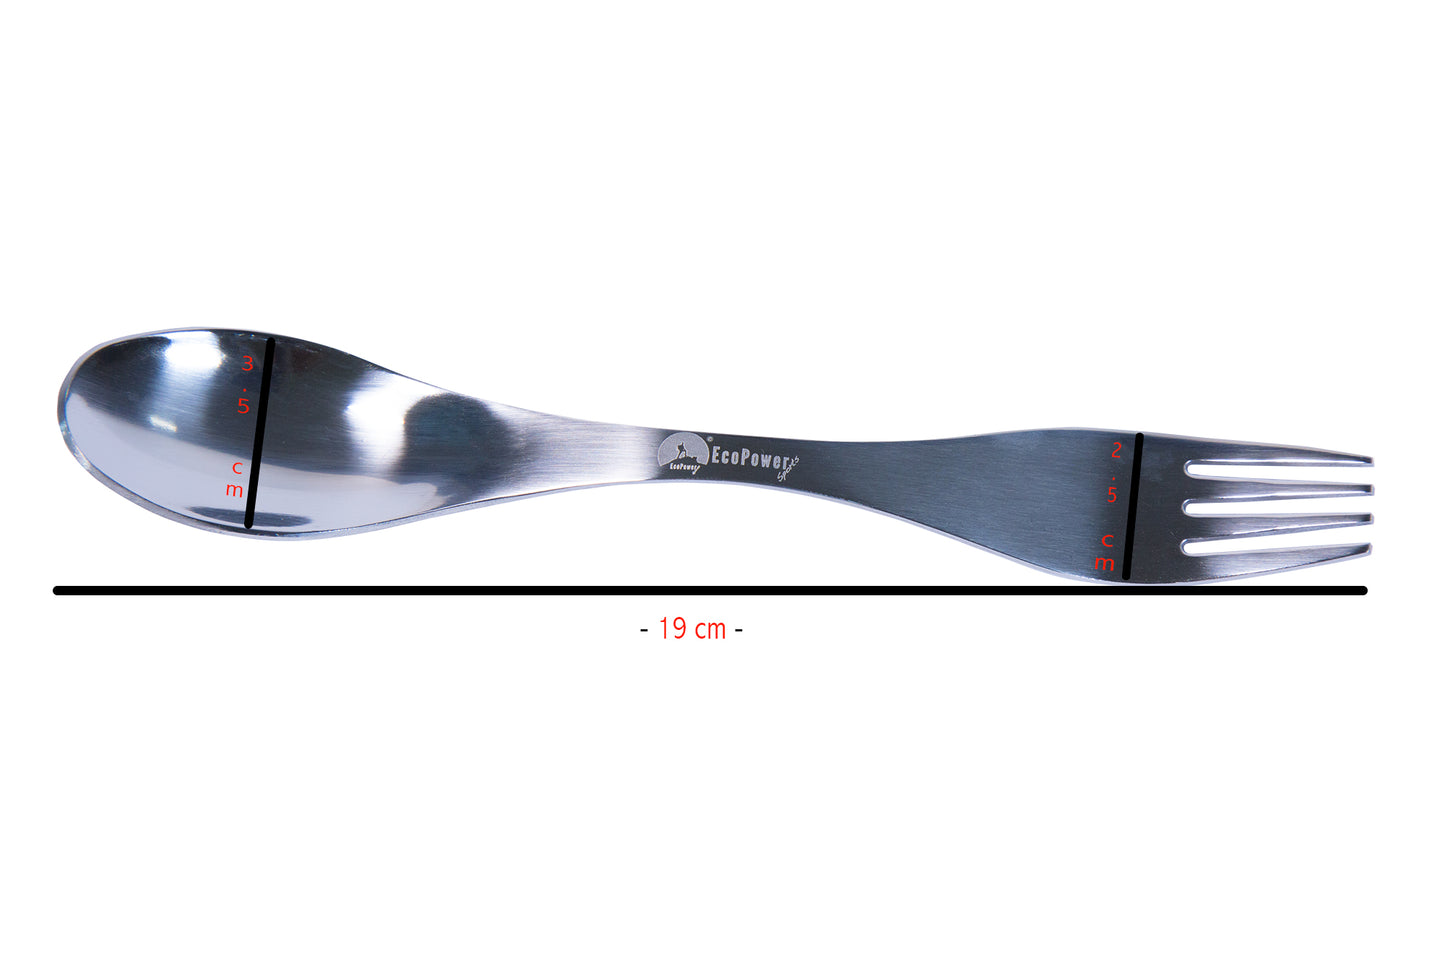 ECOPOWER SPORTS® measures are, 3.5cm wide on the spoon side, 2.5 cm wide in the fork side and 19 cm long, in the centre is is thiner for better grasp.